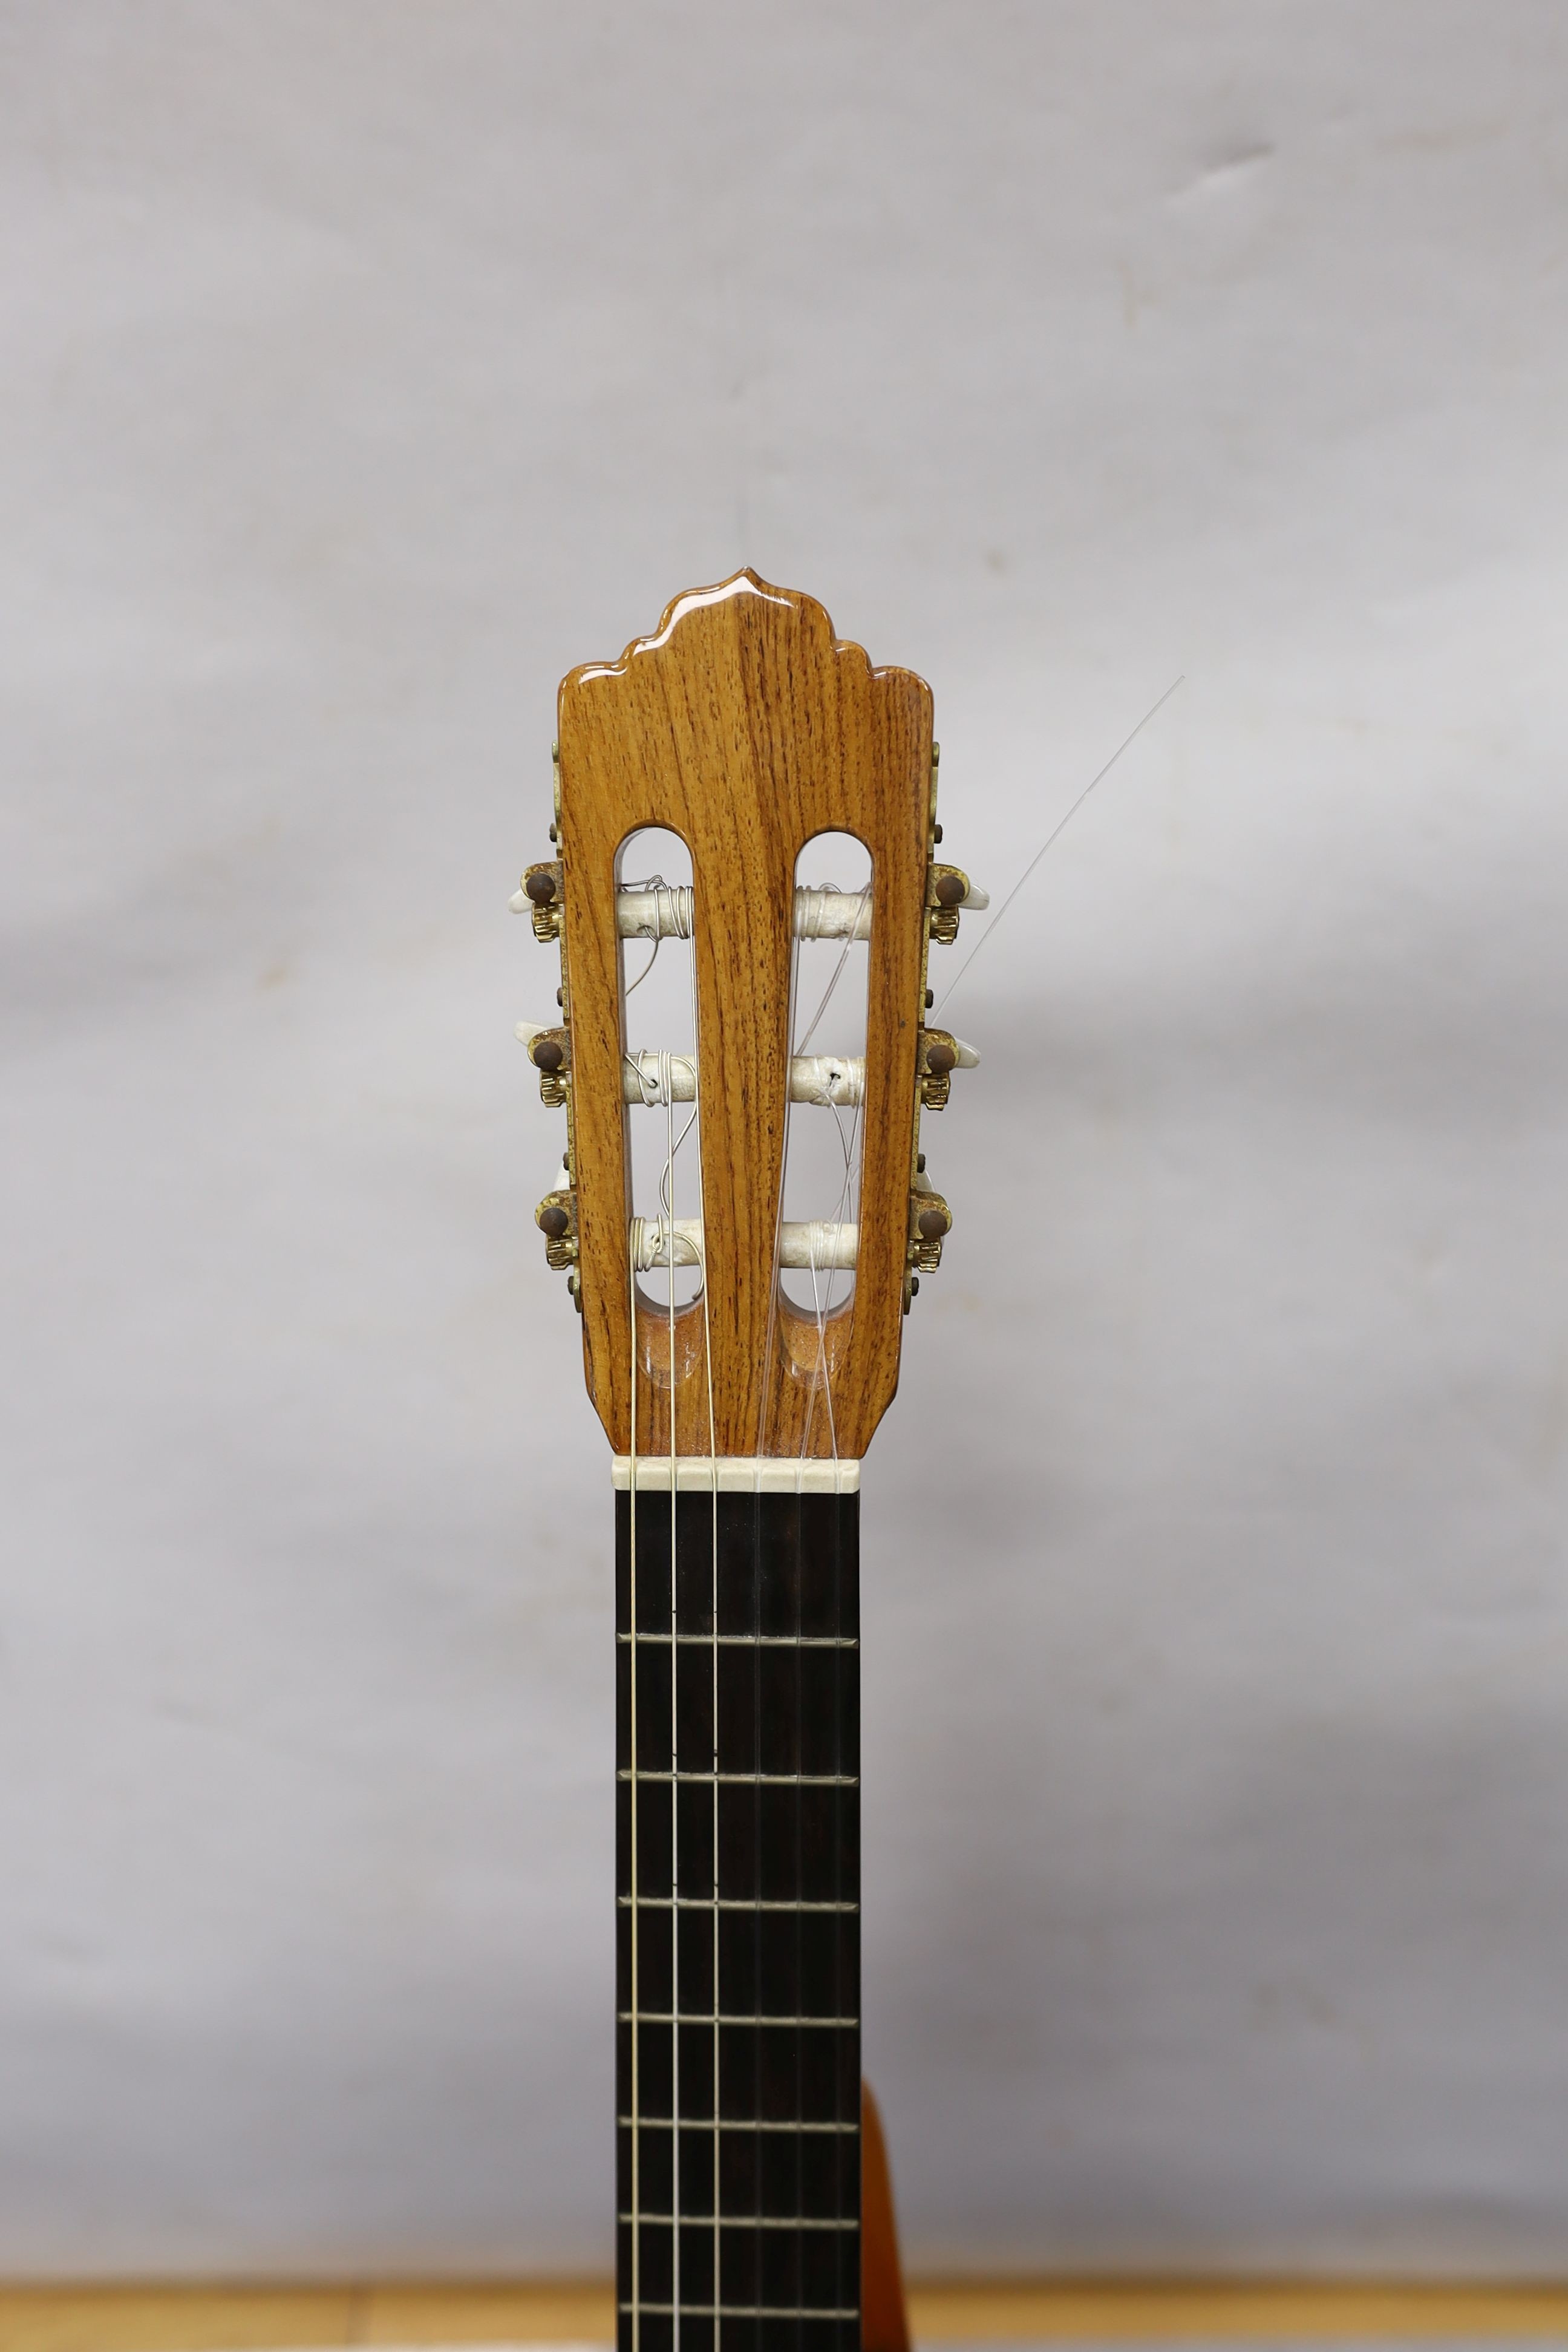 Manuel Rodriguez Model B Espana guitar with stand - Image 3 of 4